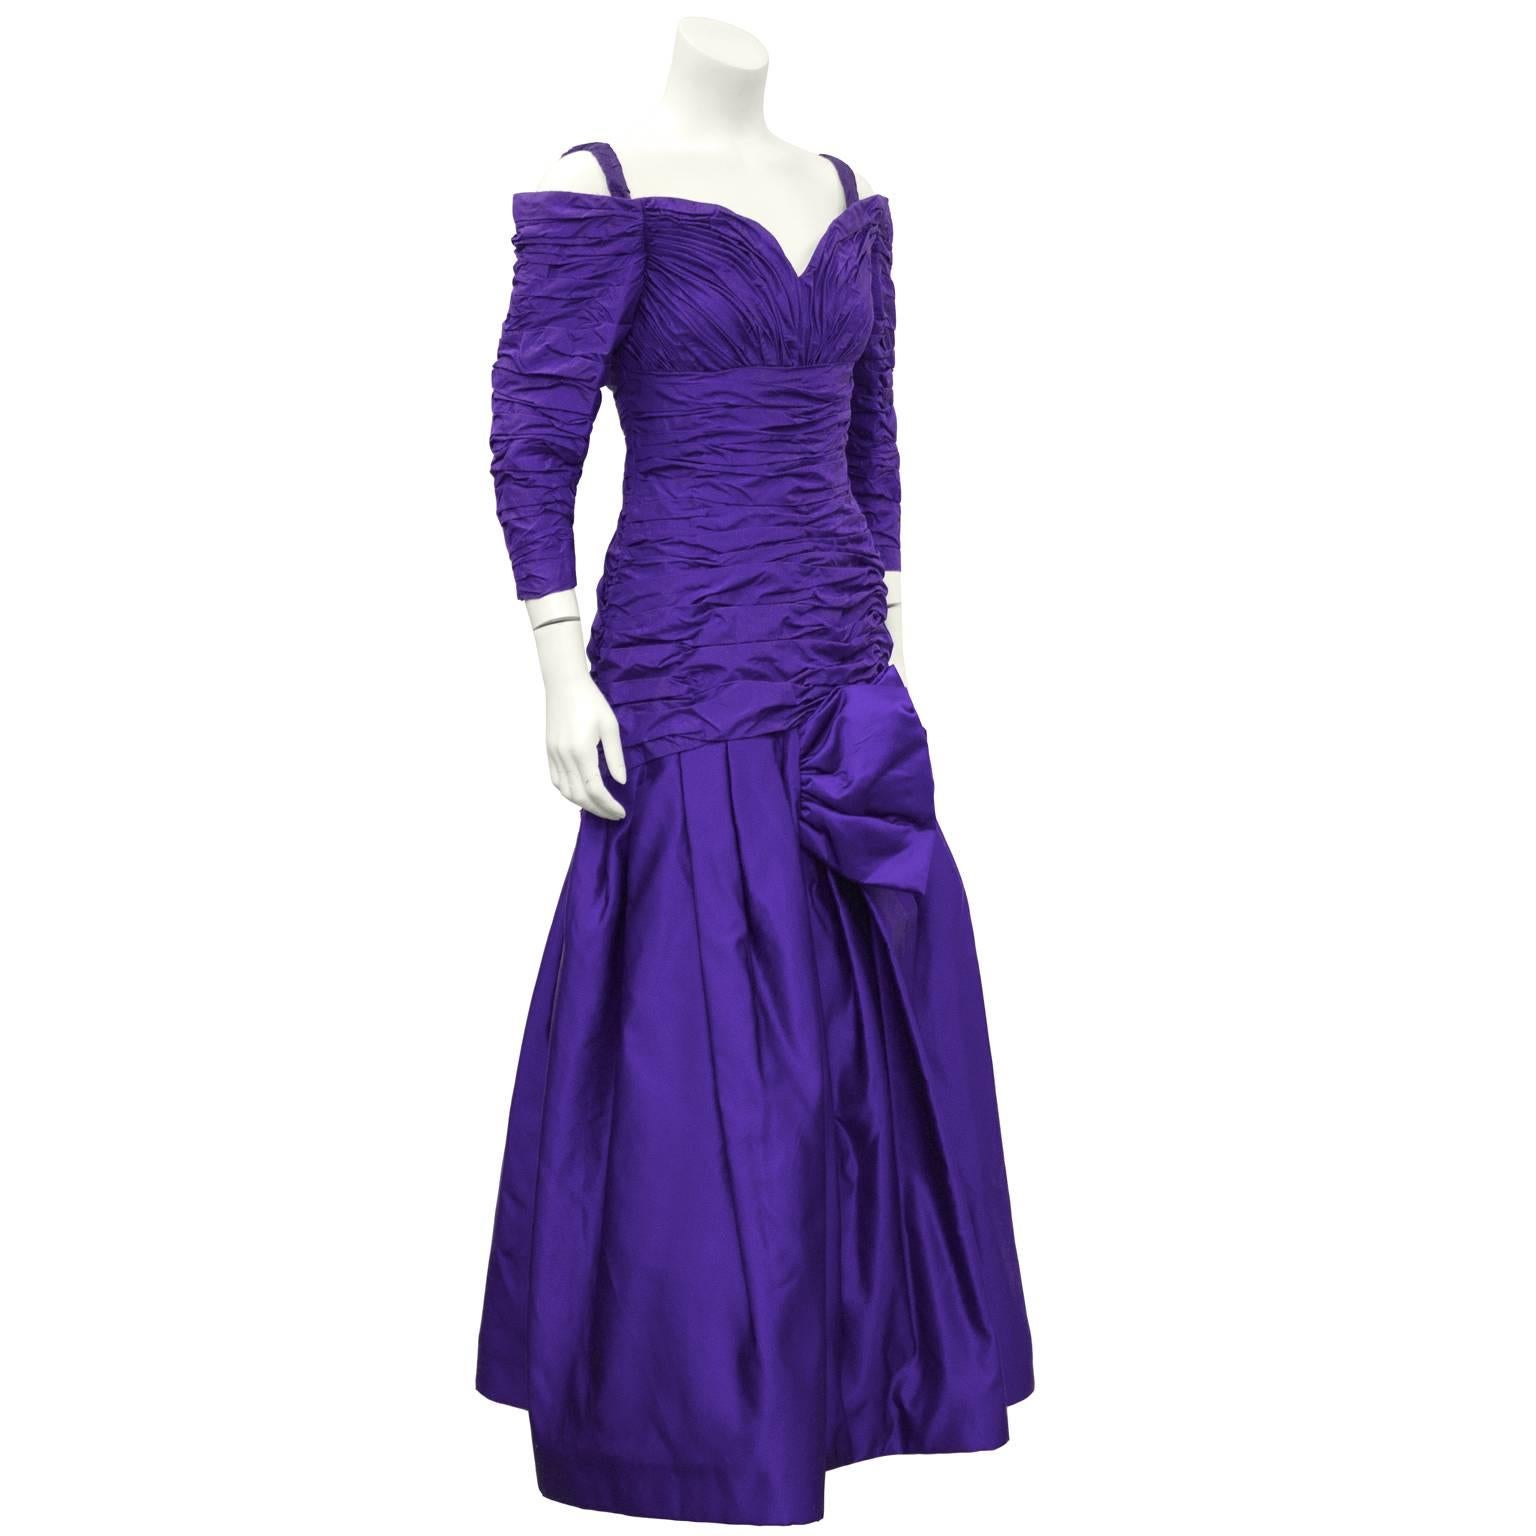 Purple ruched Arnold Scaasi evening gown from the 1980's. Sweetheart neckline, elastic shoulder straps, 3/4 length sleeves and a drop waist. Fitted through the body with a full skirt and a bow detail on the lower left hip. Zips up the back, attached